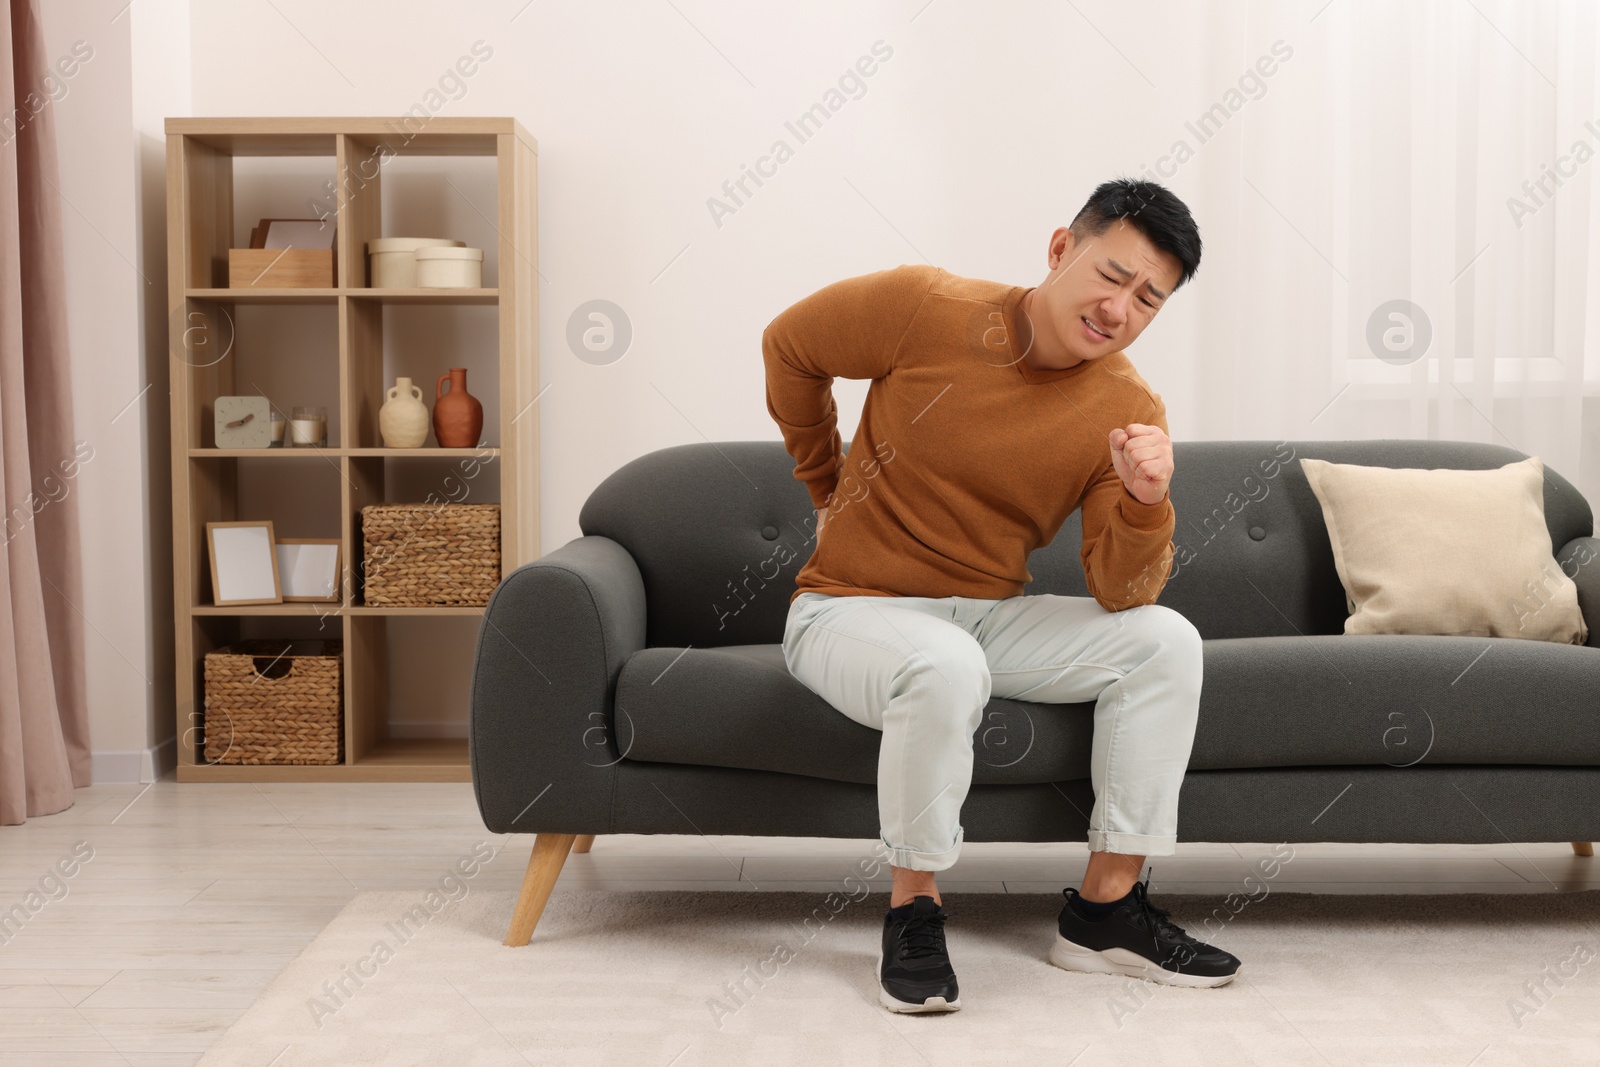 Photo of Asian man suffering from back pain on sofa indoors